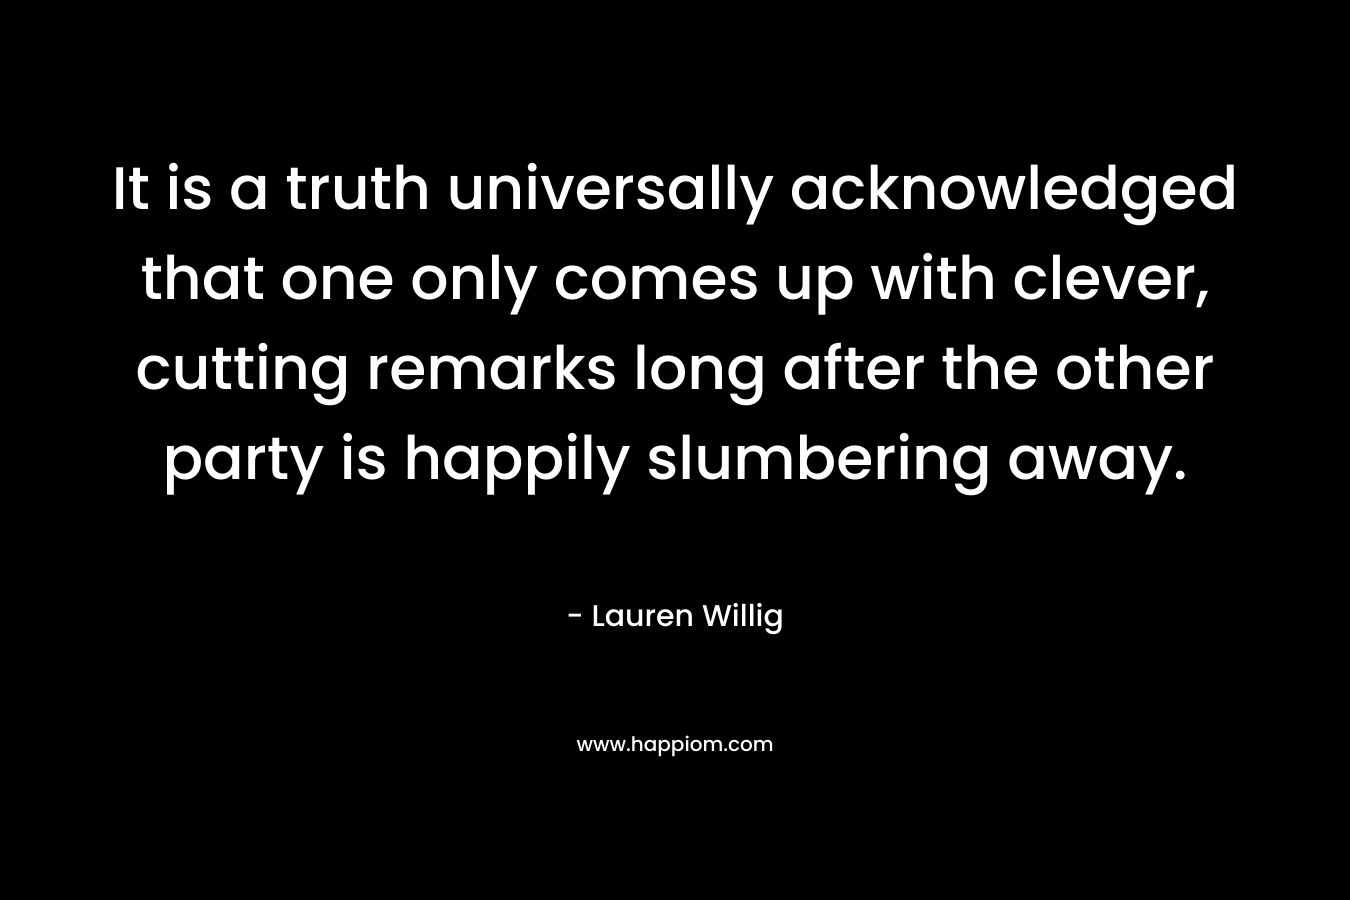 It is a truth universally acknowledged that one only comes up with clever, cutting remarks long after the other party is happily slumbering away. – Lauren Willig